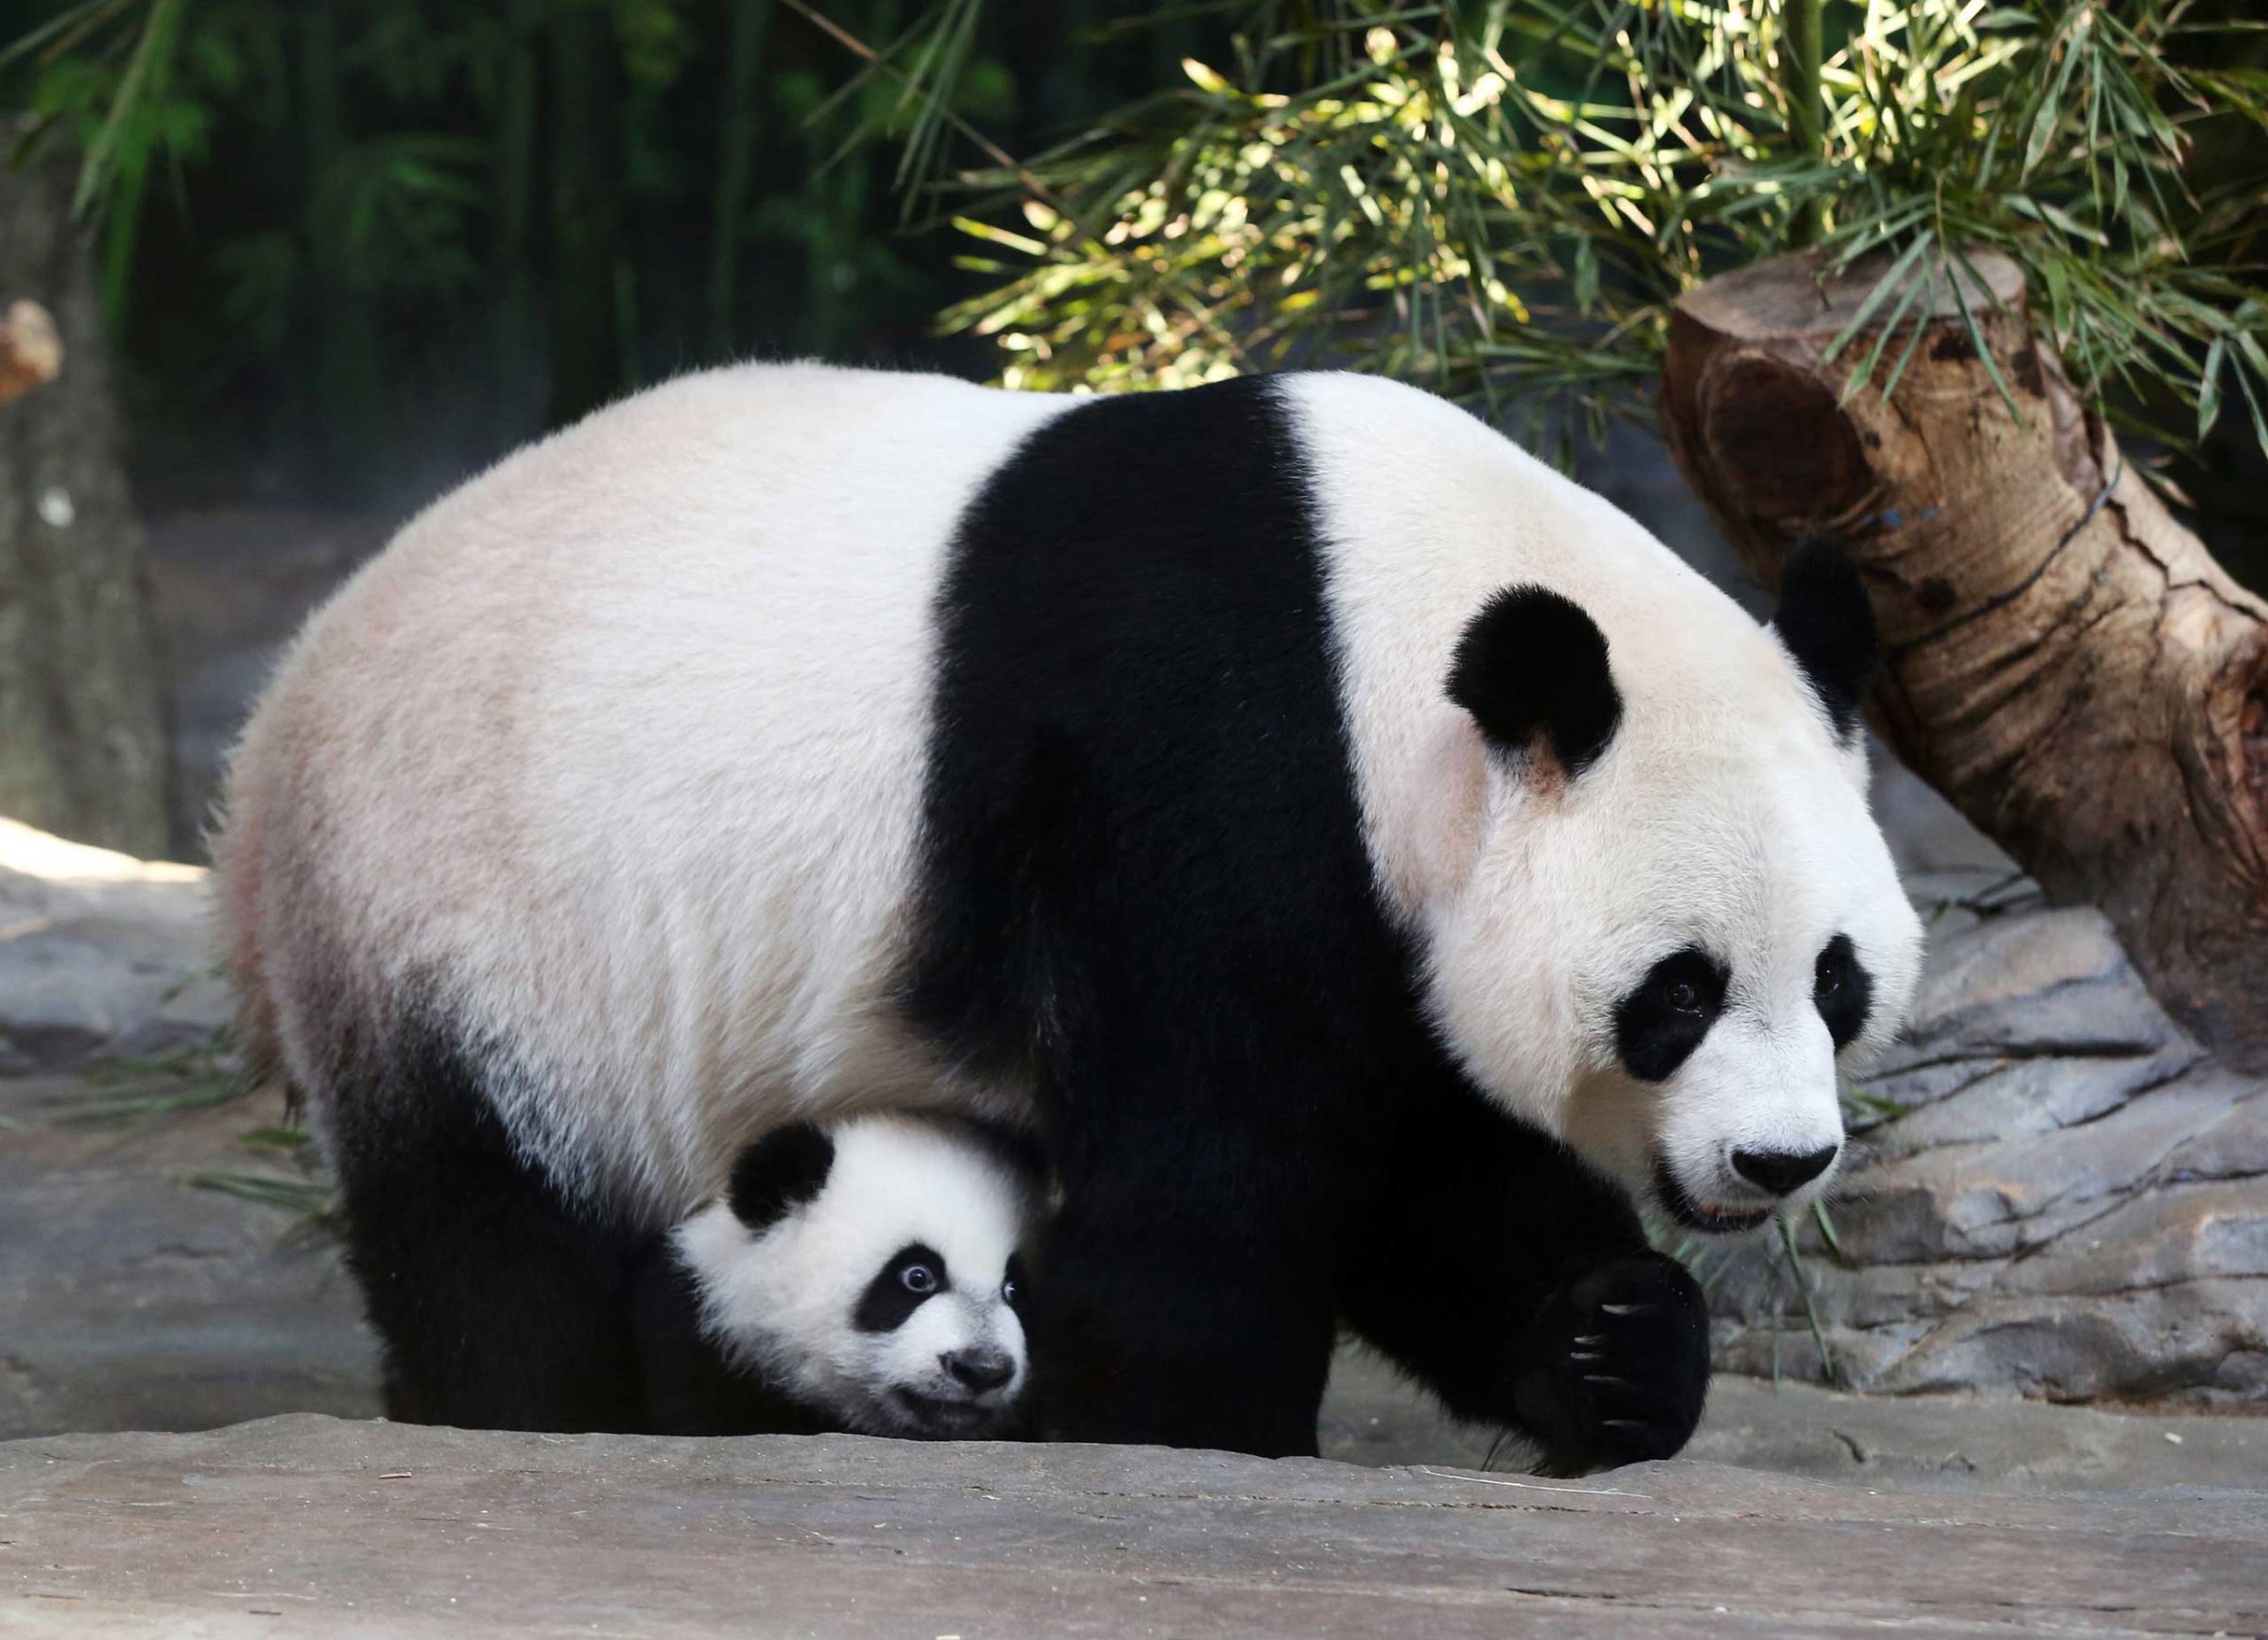 Mother giant panda Juxiao is seen with one of her triplets at Chimelong Safari Park in Guangzhou, Guangdong province